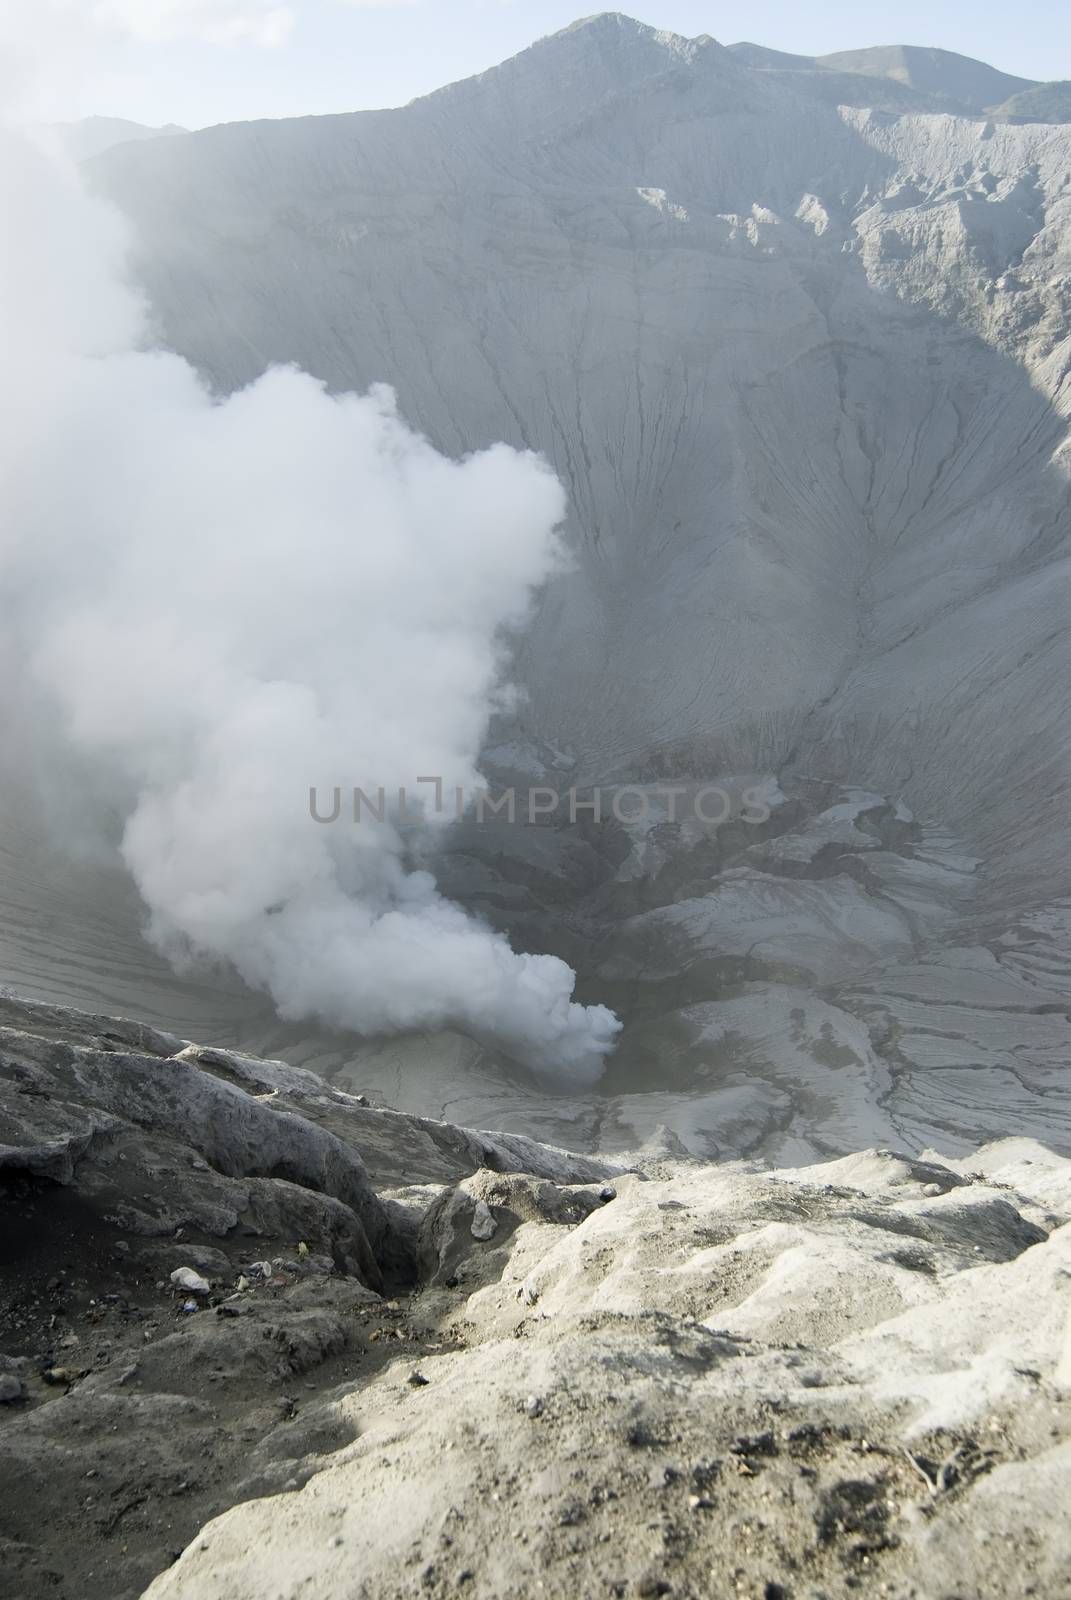 Images from Bromo National Park, Java, Indonesia